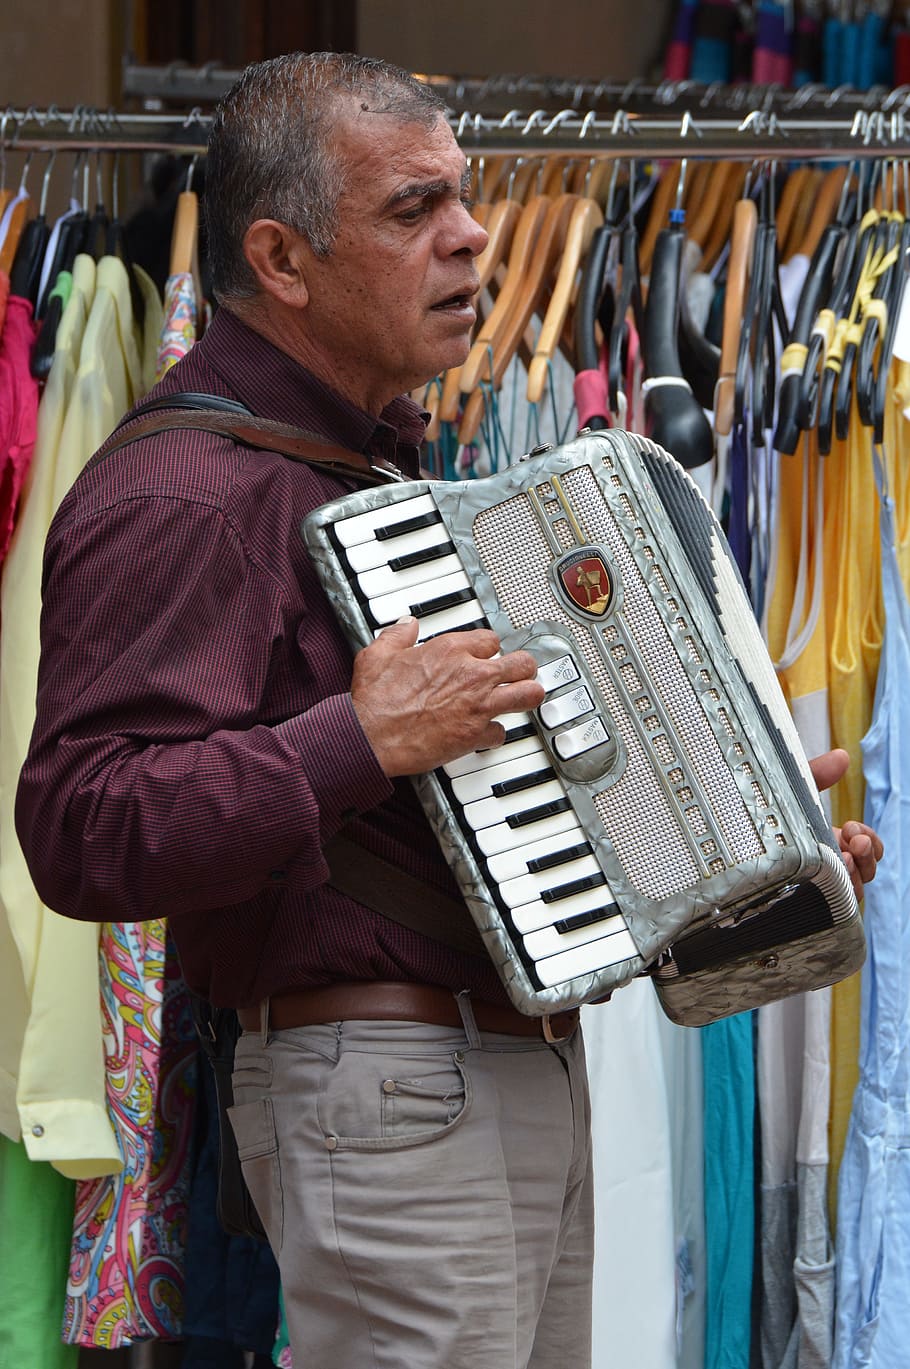 Busker, Musician, Accordion, Music, people, man, men, clothing, one Person, adult